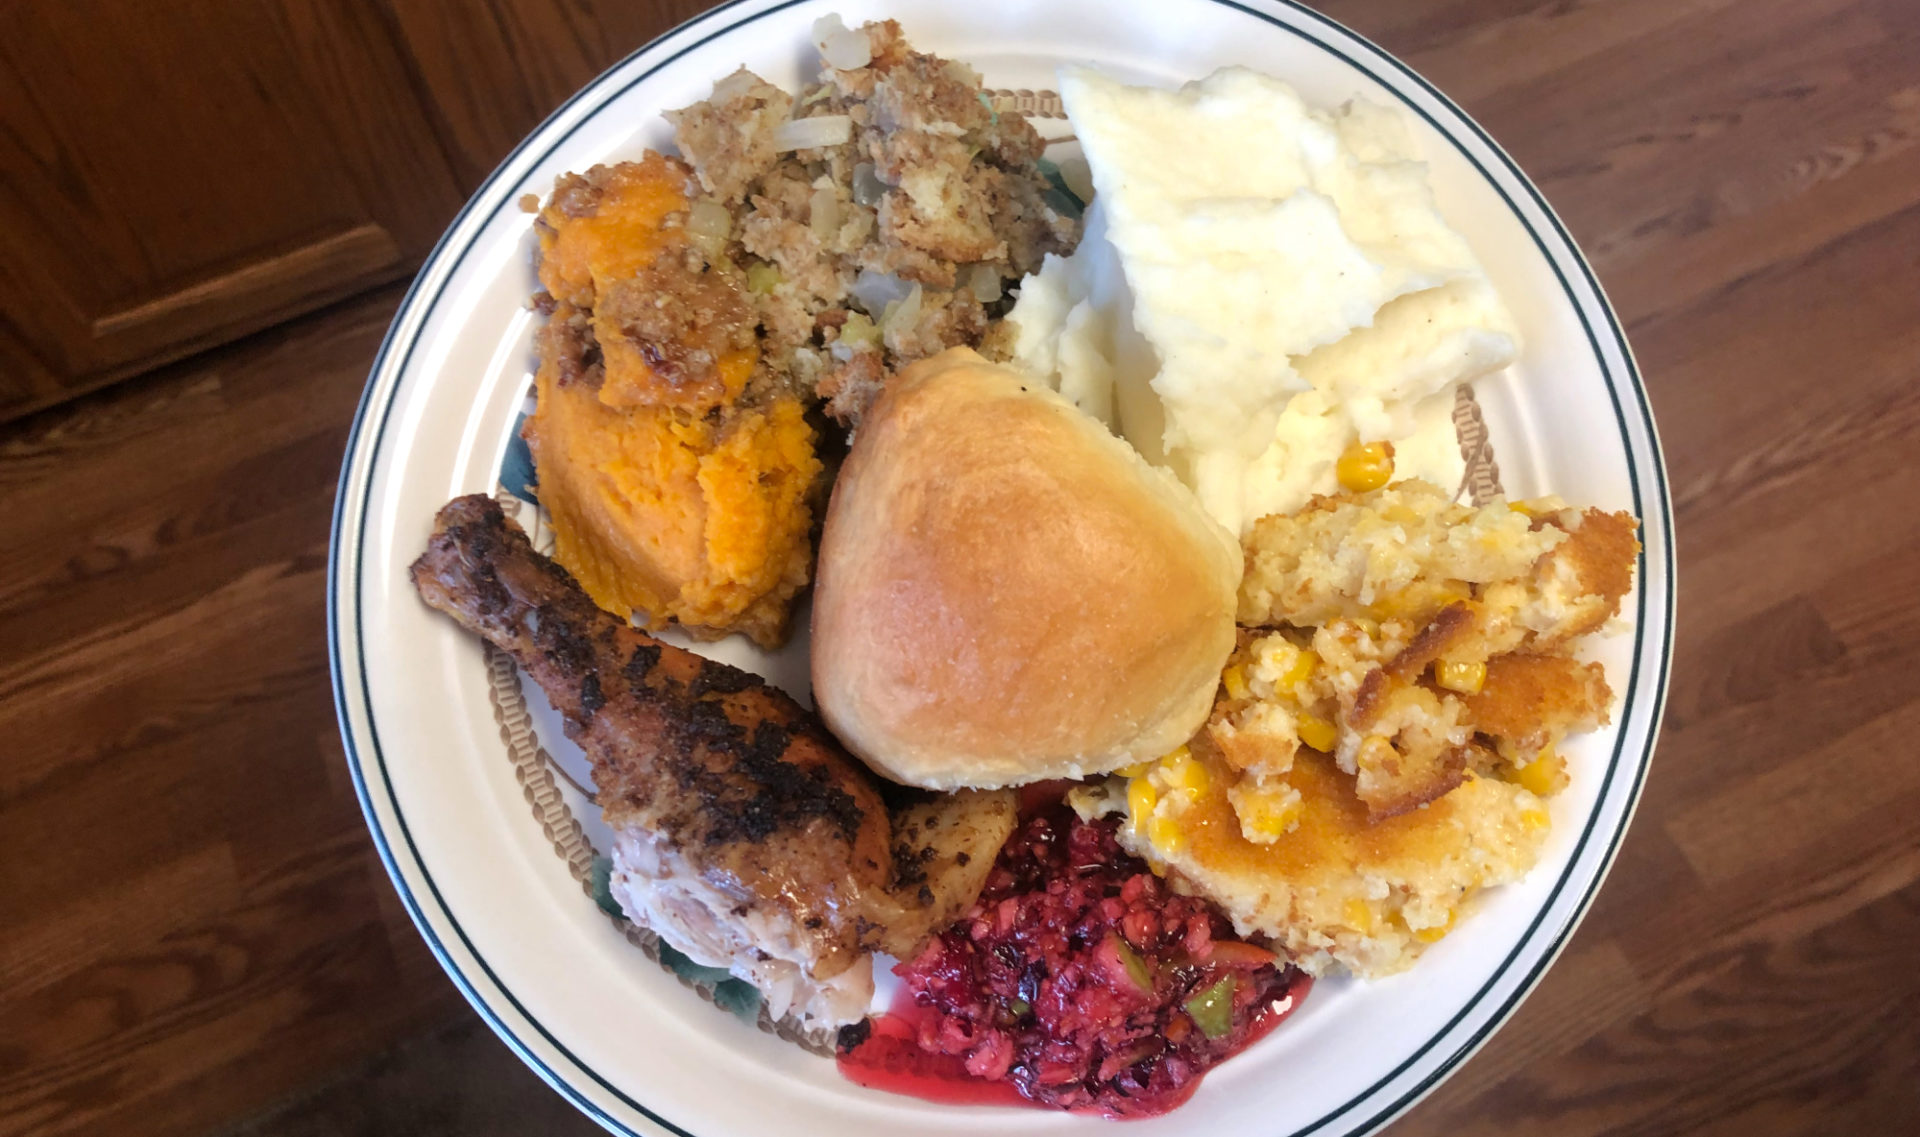 Thanksgiving plate of turkey plus sides.